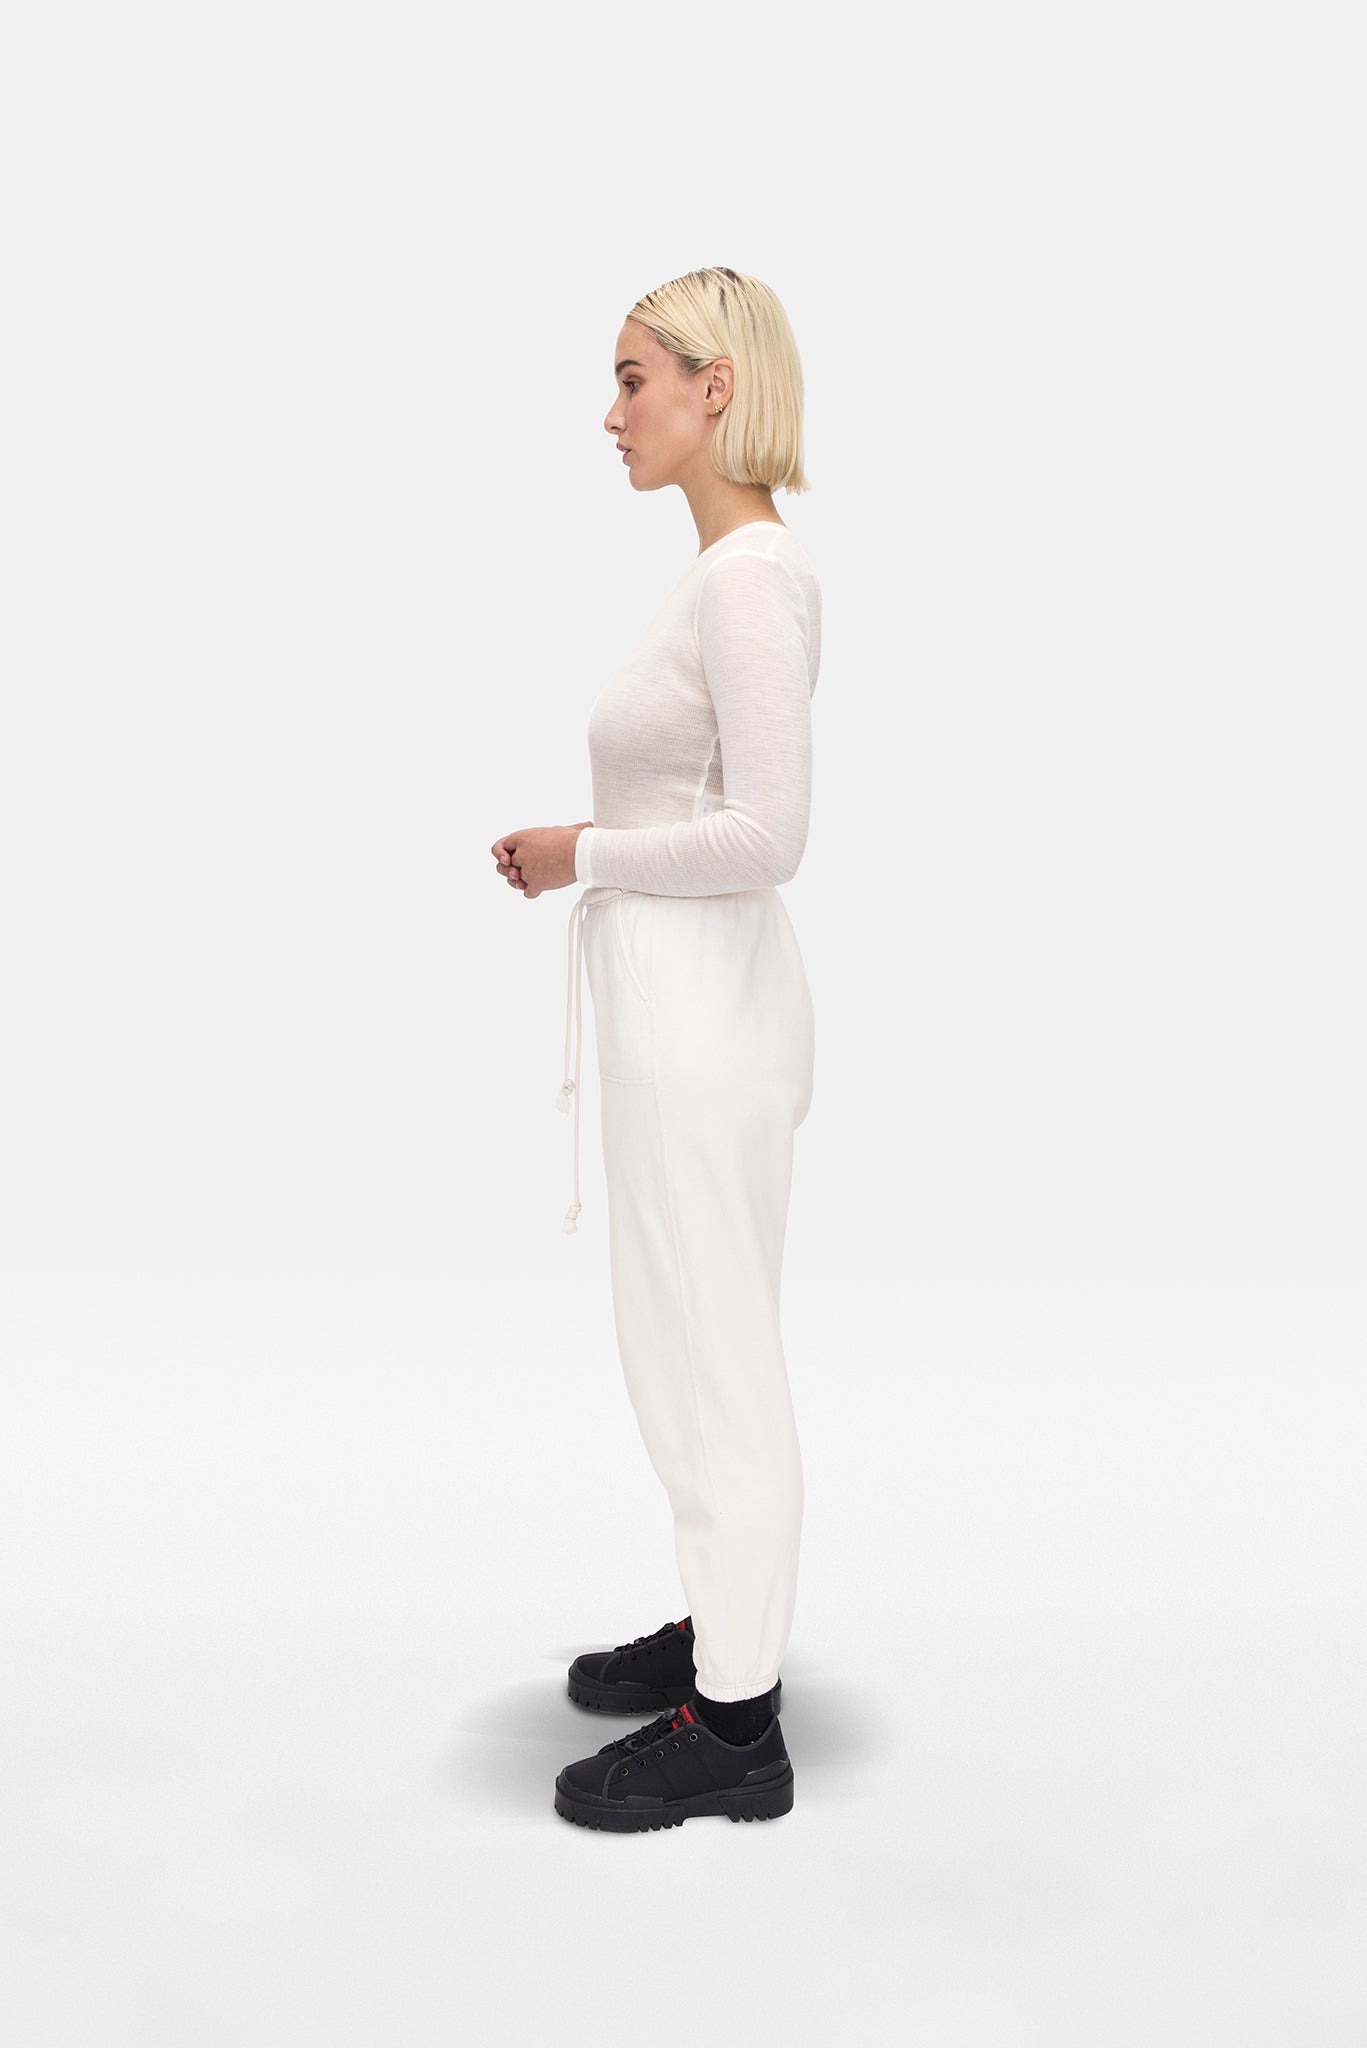 A.BCH A.34 Ivory Long Sleeve Thermal T-Shirt in Australian Merino